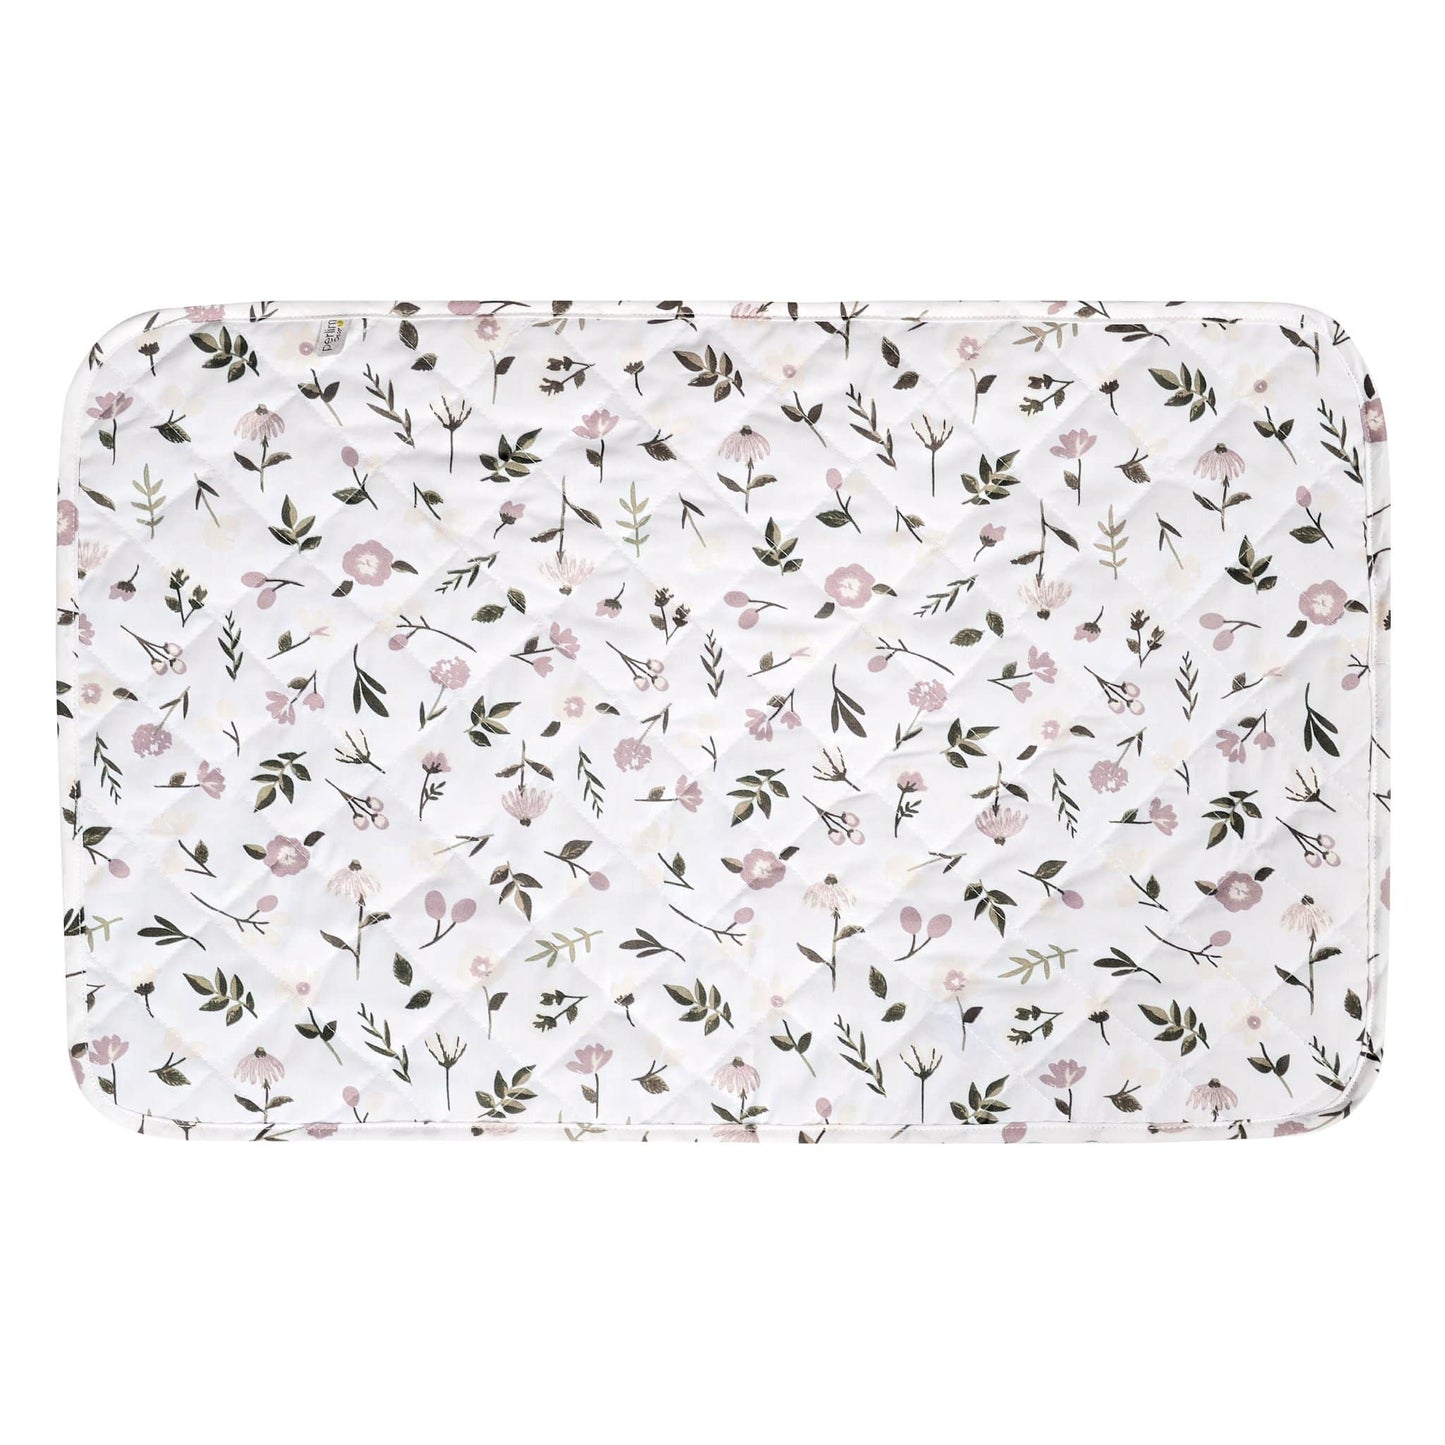 Waterproof change pad - floral (16x24 inches)